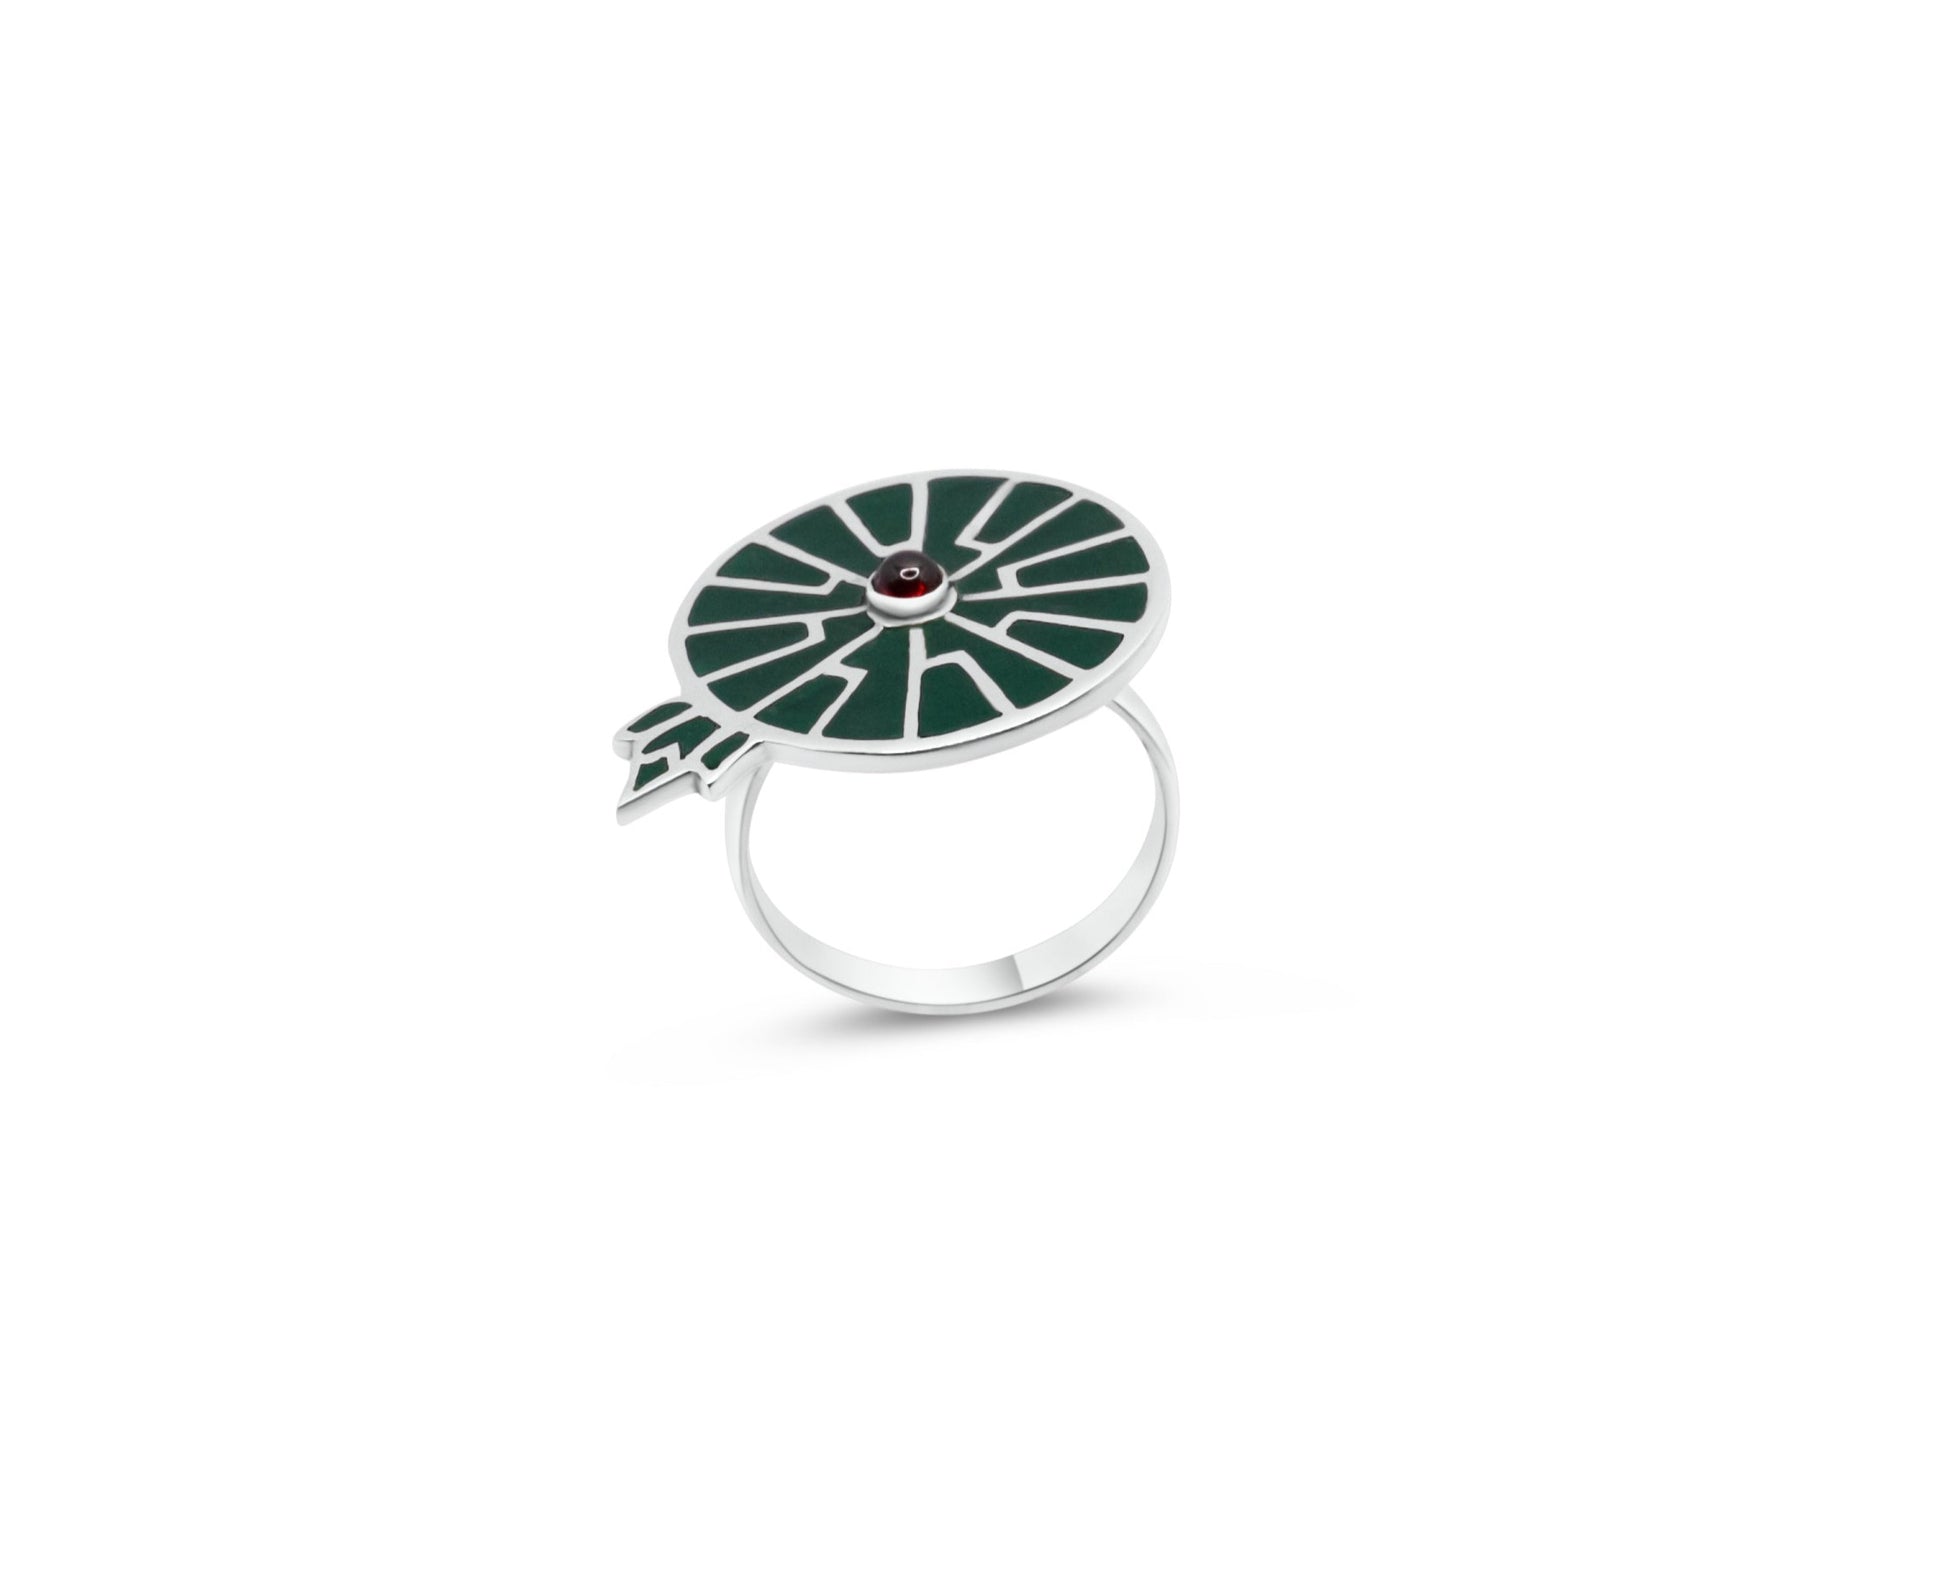 A ring in sterling silver, shaped like a Victoria Amazonica leaf with green inlay and a garnet gemstone, reflecting the beauty of the Amazon.